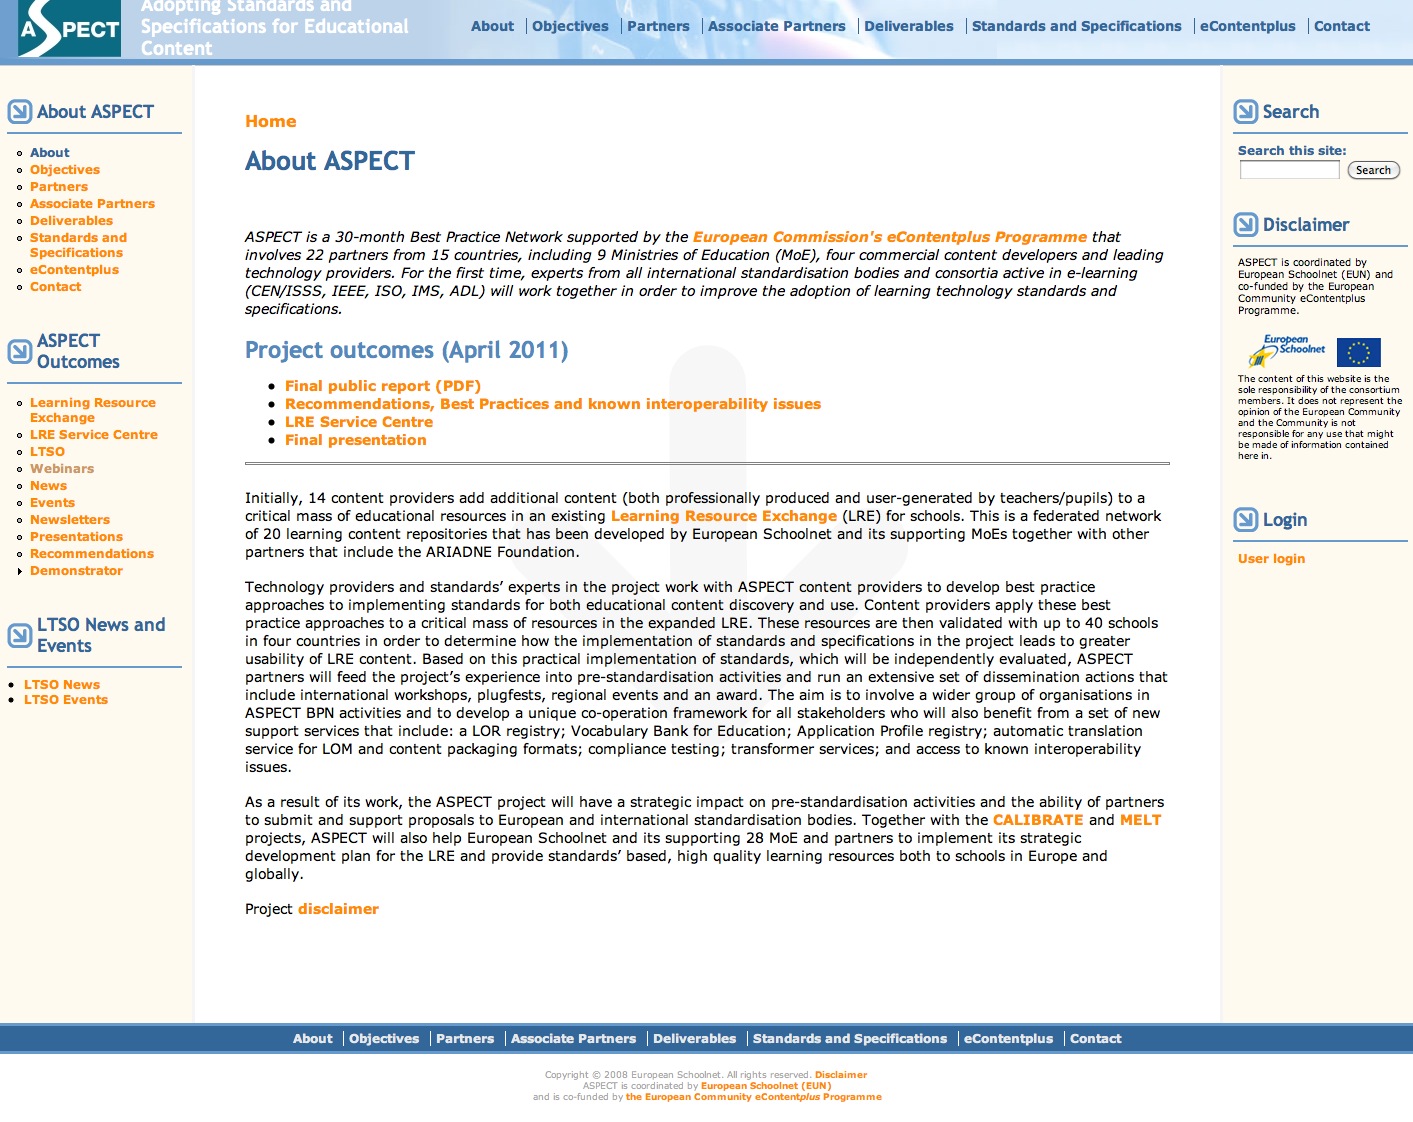 ASPECT: Adopting Standards and Specifications for Educational Content | Recurso educativo 39242